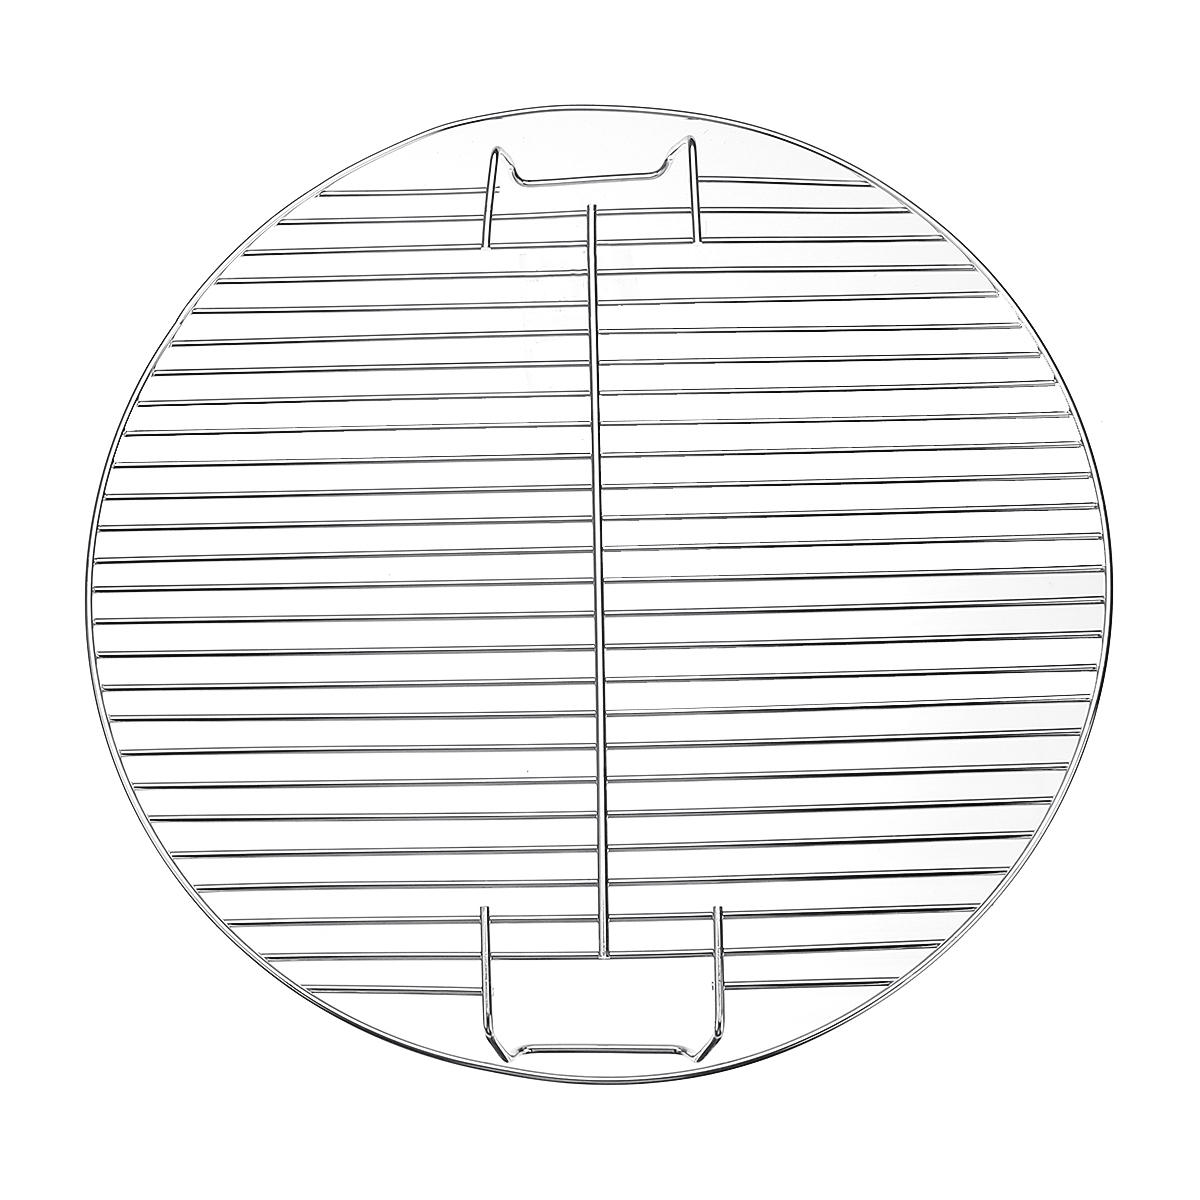 44.5cm Round BBQ Grill Grate Charcoal BBQ Grill Pan Replacement Metal Cooking Barbecue Mesh Frame